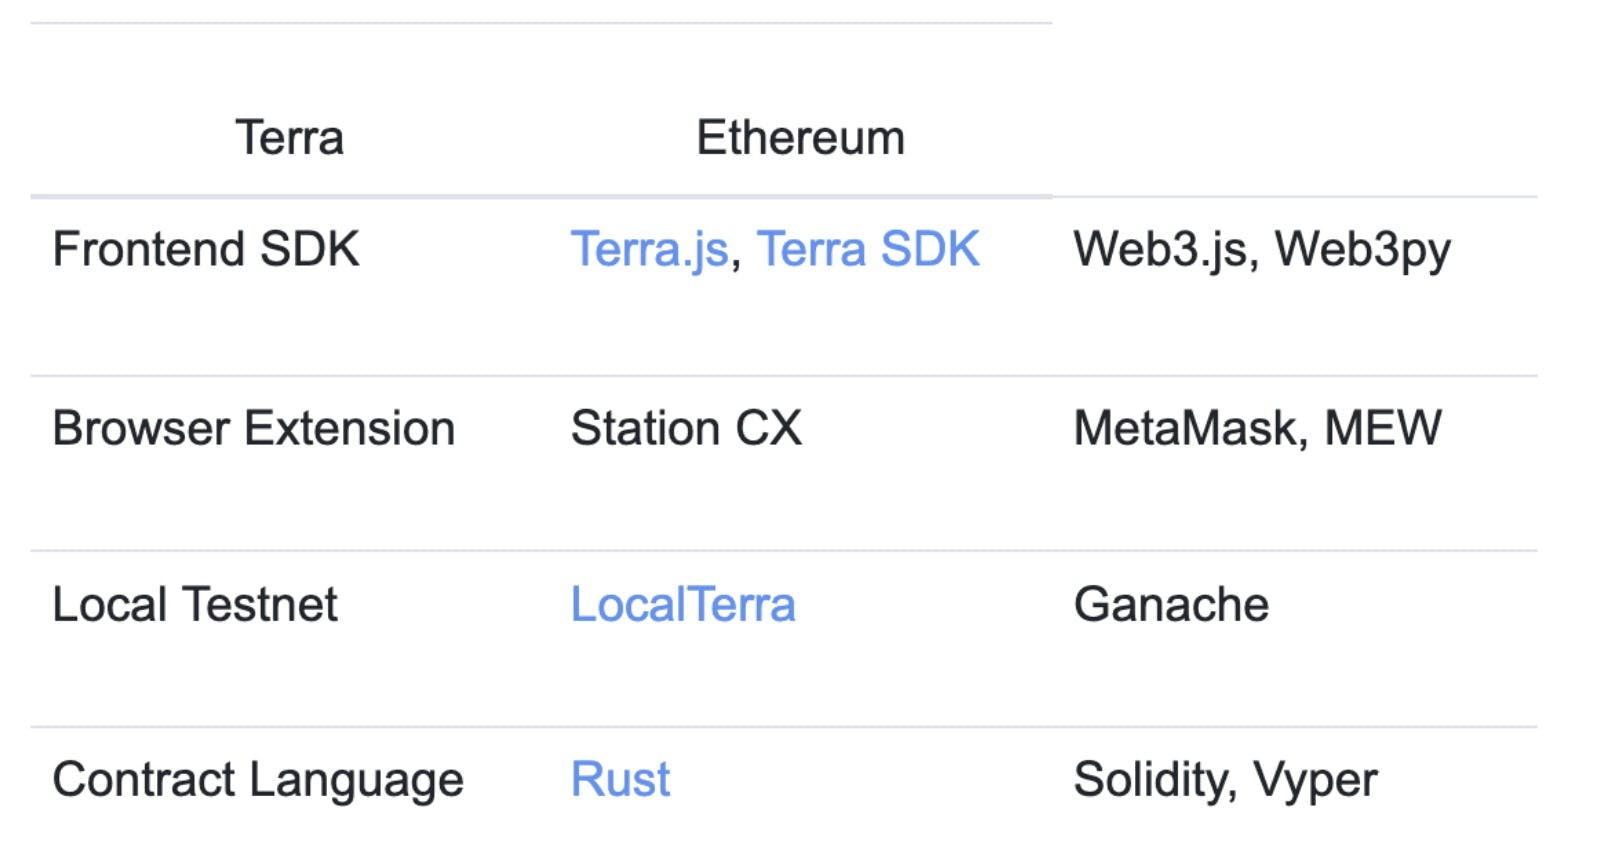 Terra and Ethereum's Tools and Libraries